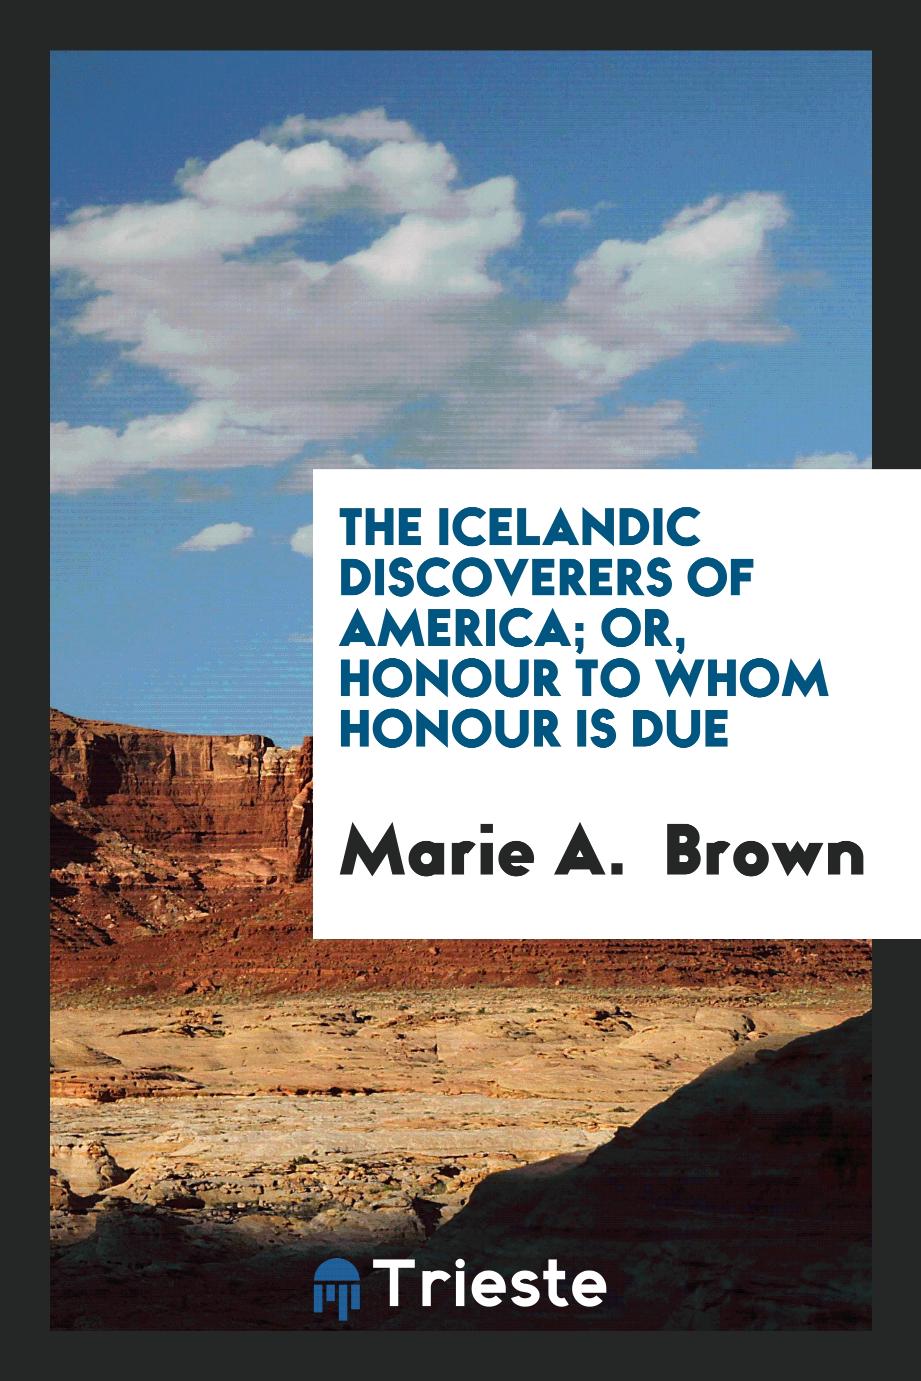 The Icelandic discoverers of America; or, Honour to whom honour is due